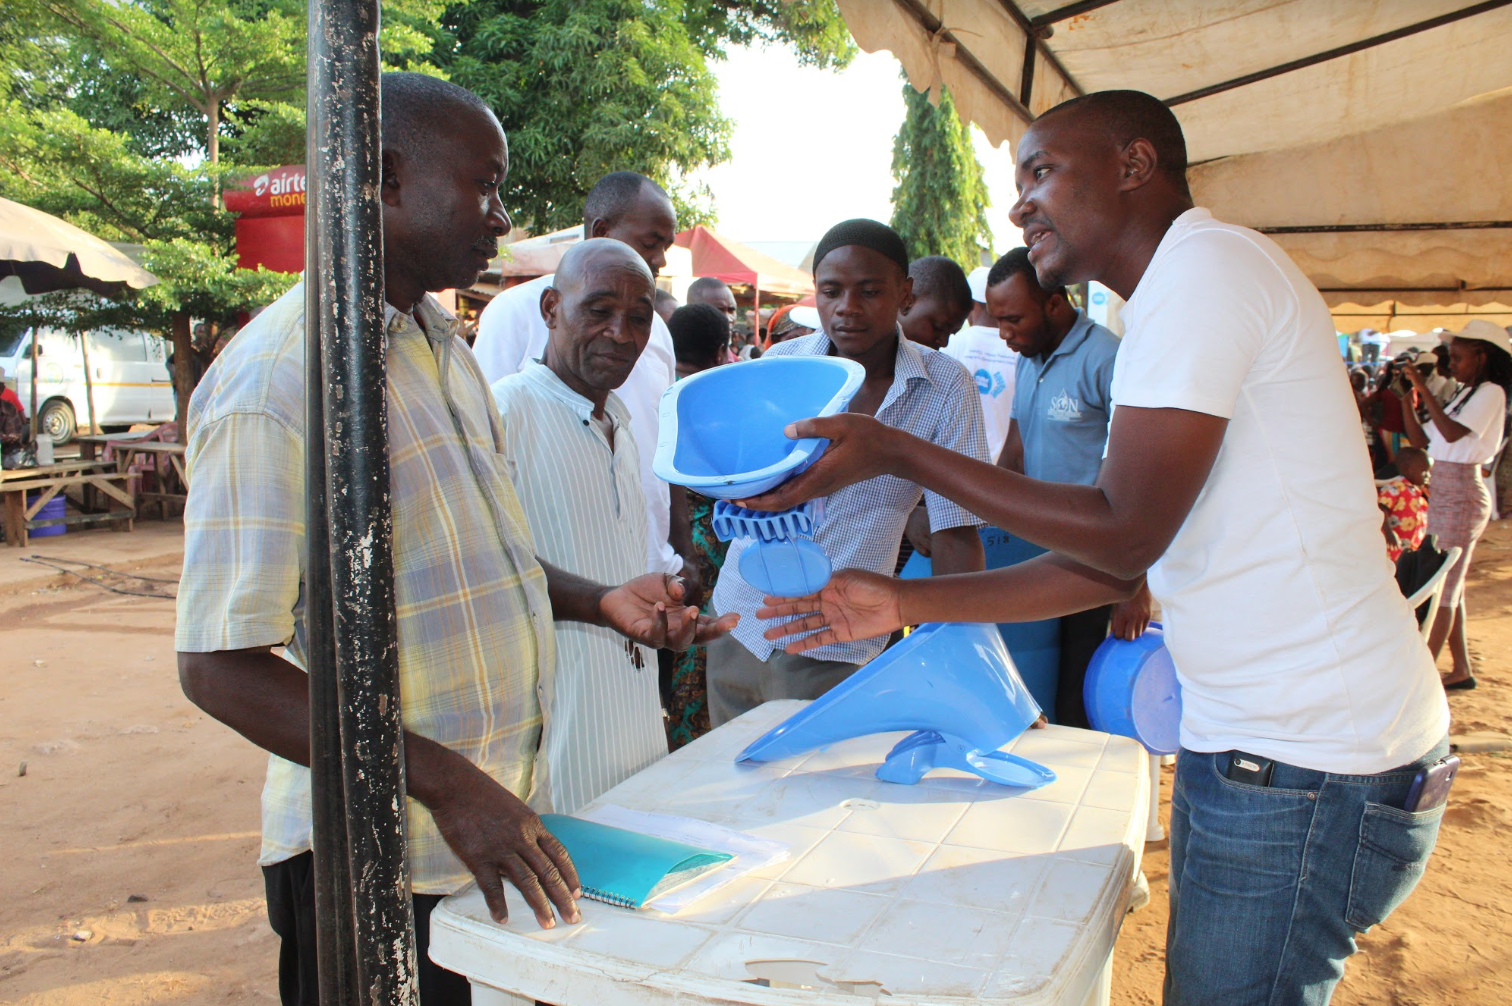 A man in a white t-shirt and jeans standing behind a table demonstrates a blue plastic latrine pan to three other men